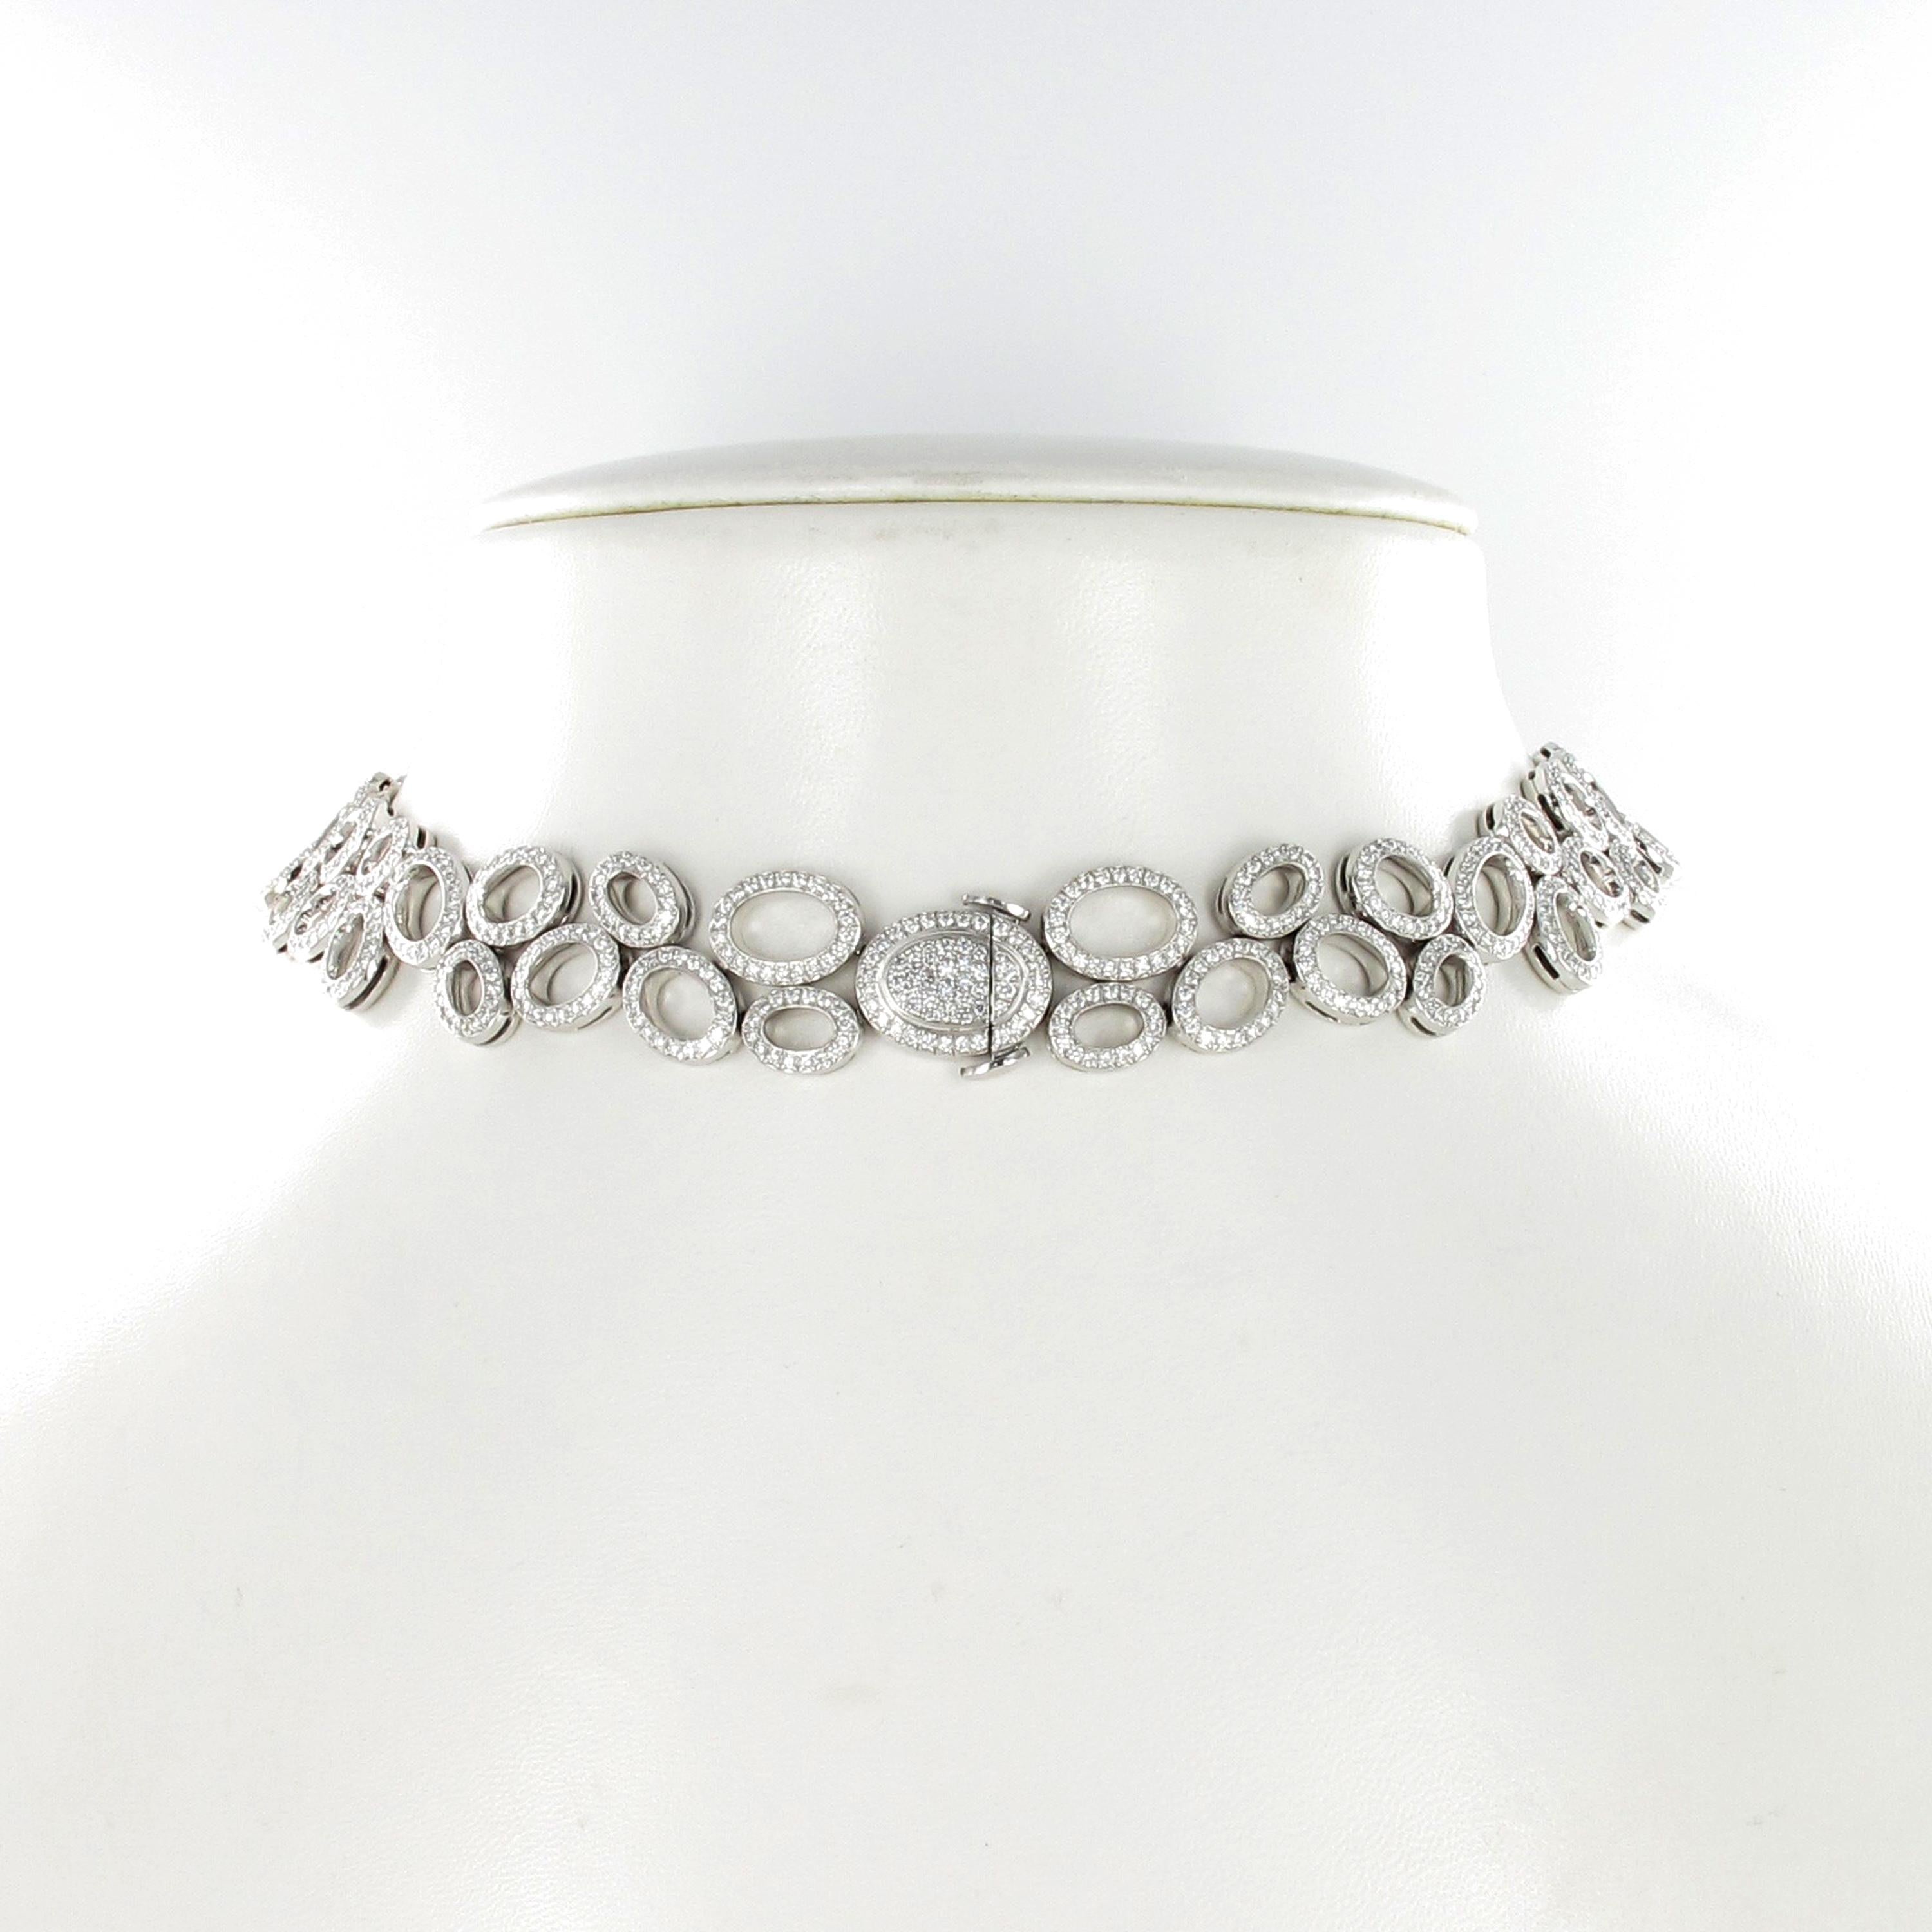 Superb Diamond Necklace in White Gold by Gübelin In Excellent Condition For Sale In Lucerne, CH